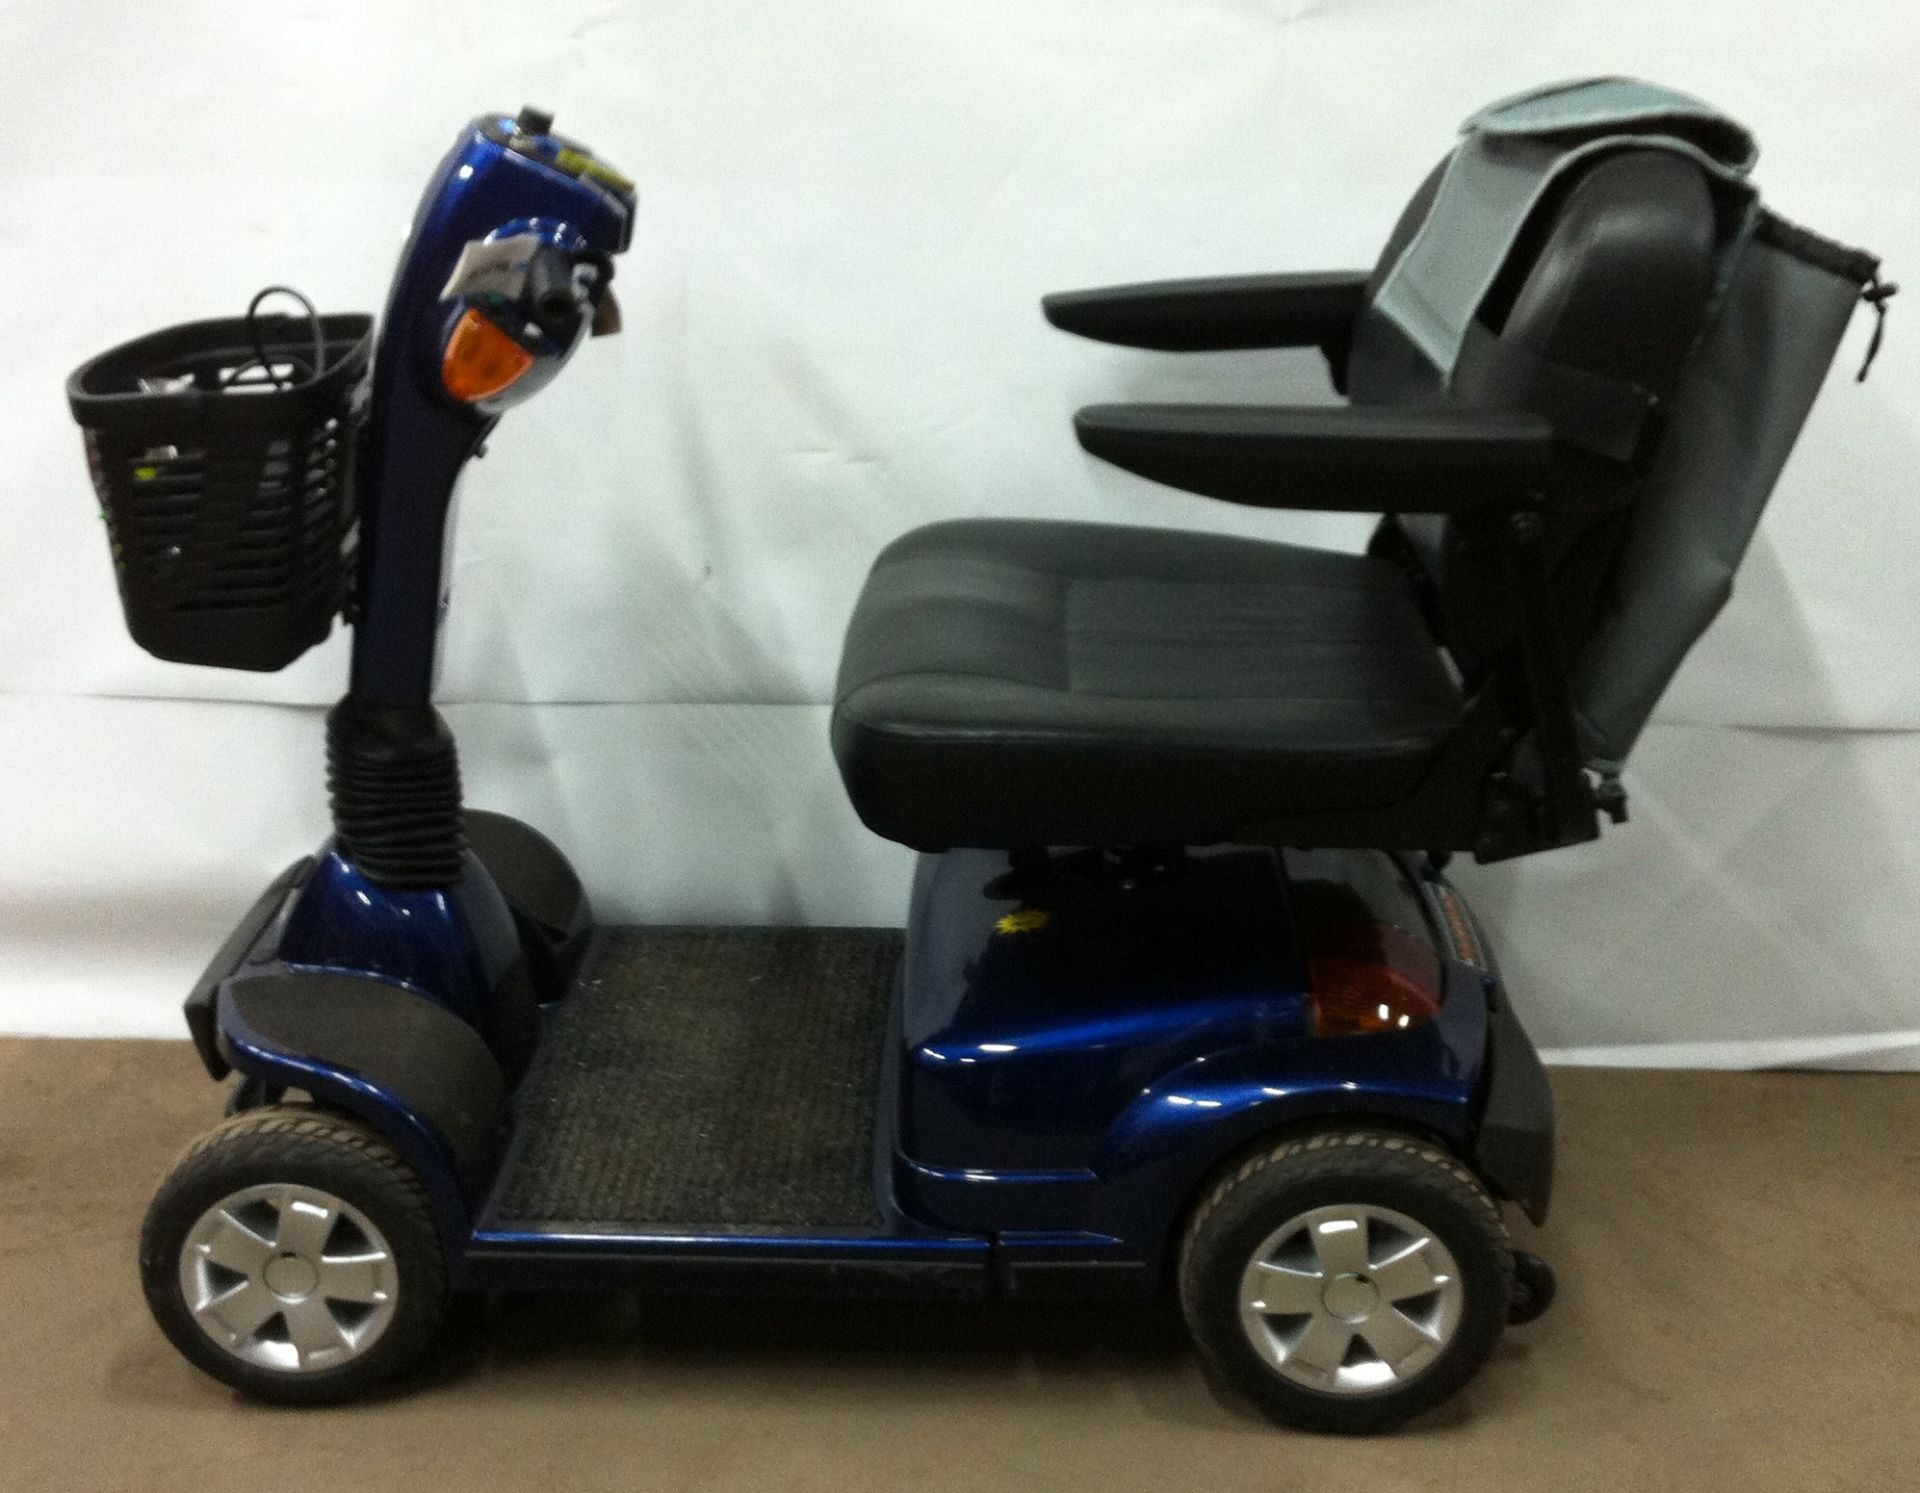 Maxima mobility scooter - Image 3 of 4